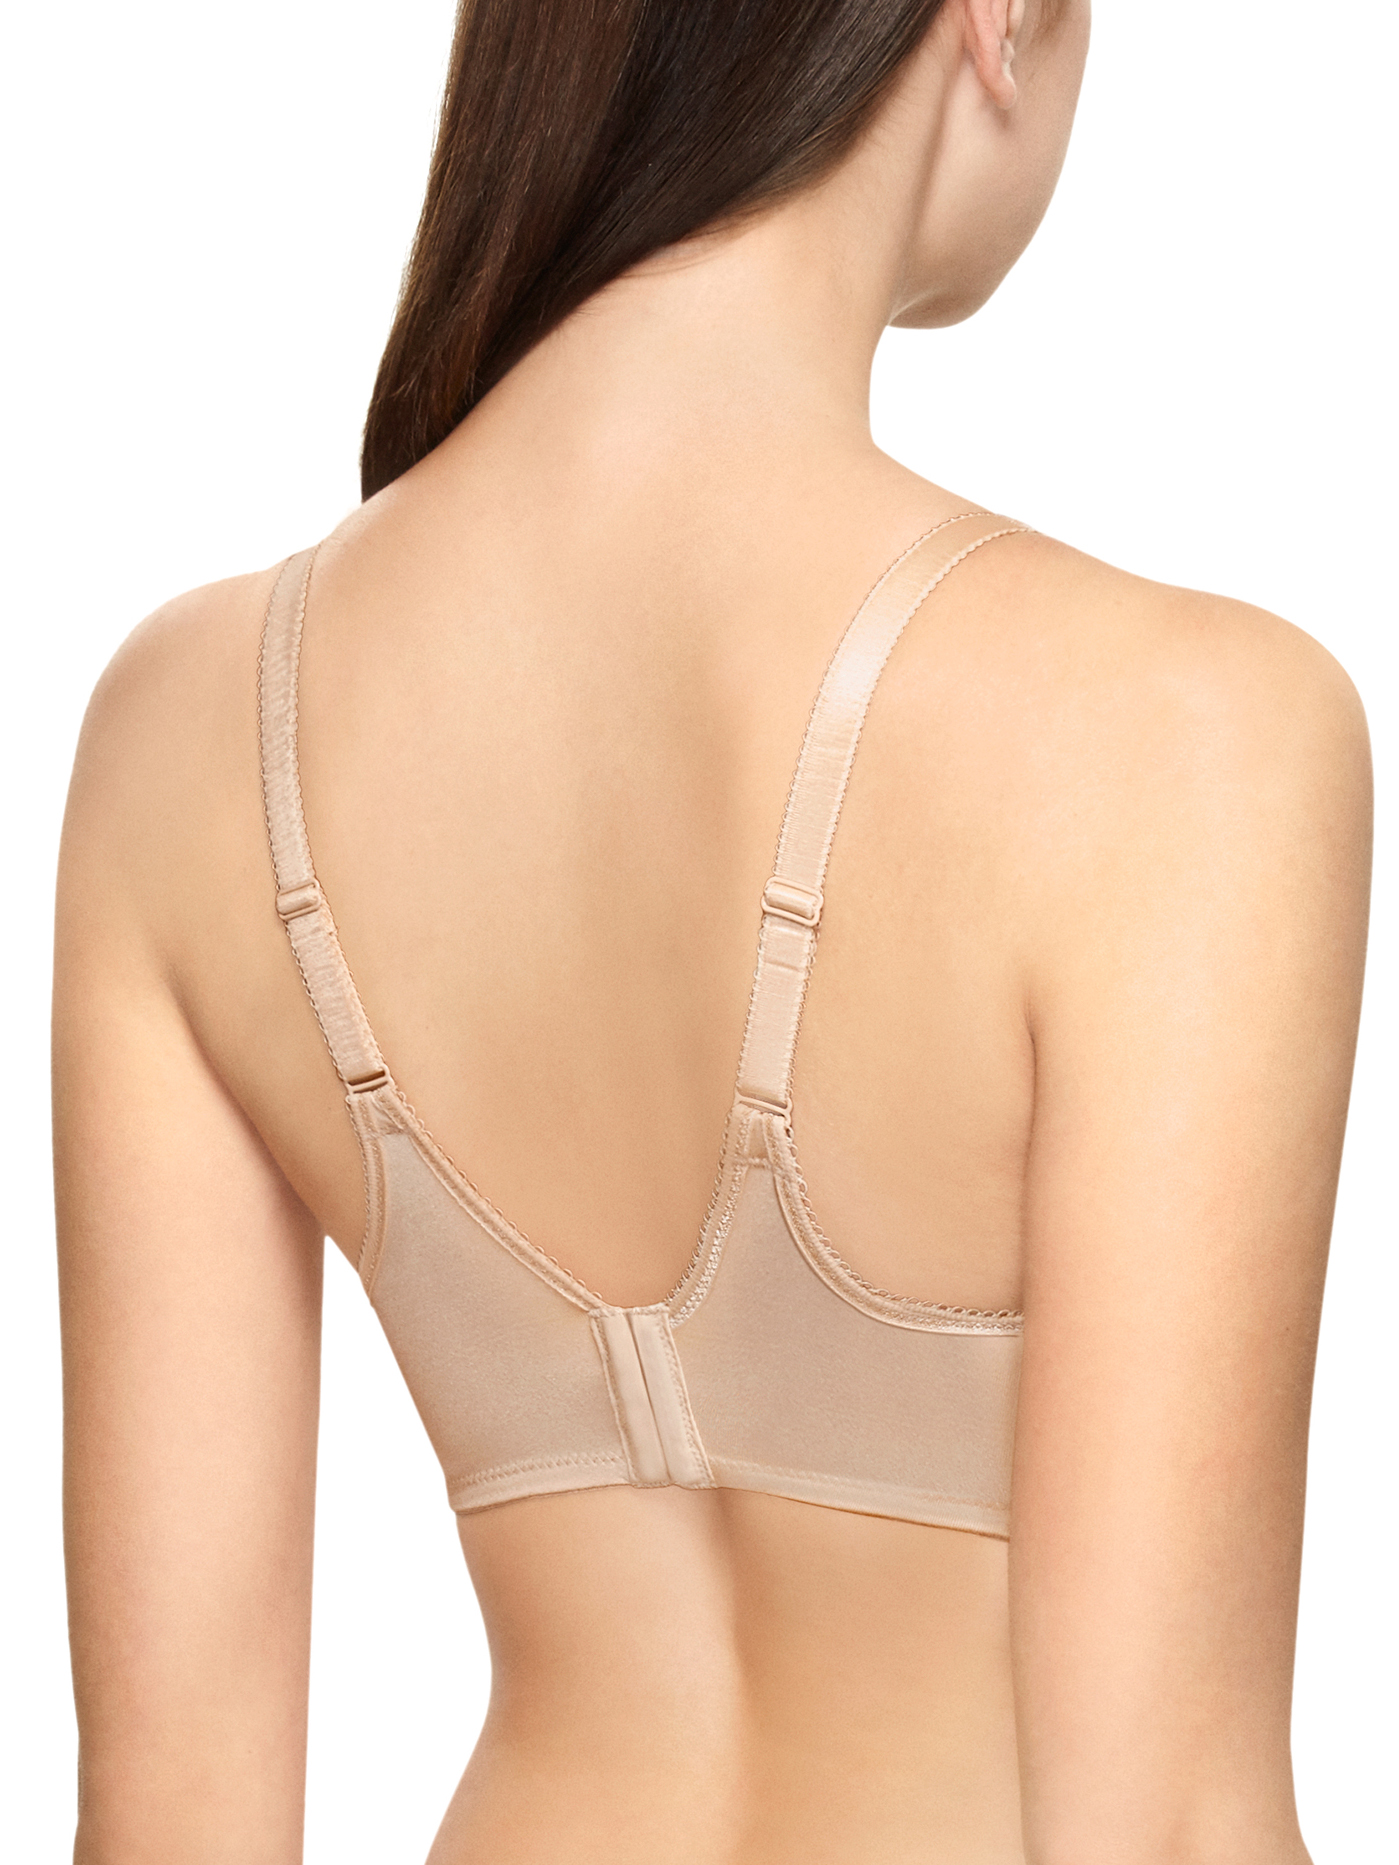 Wacoal 85567 Awareness Full Figure Seamless Underwire Bra 36 G Natural Nude  36g for sale online